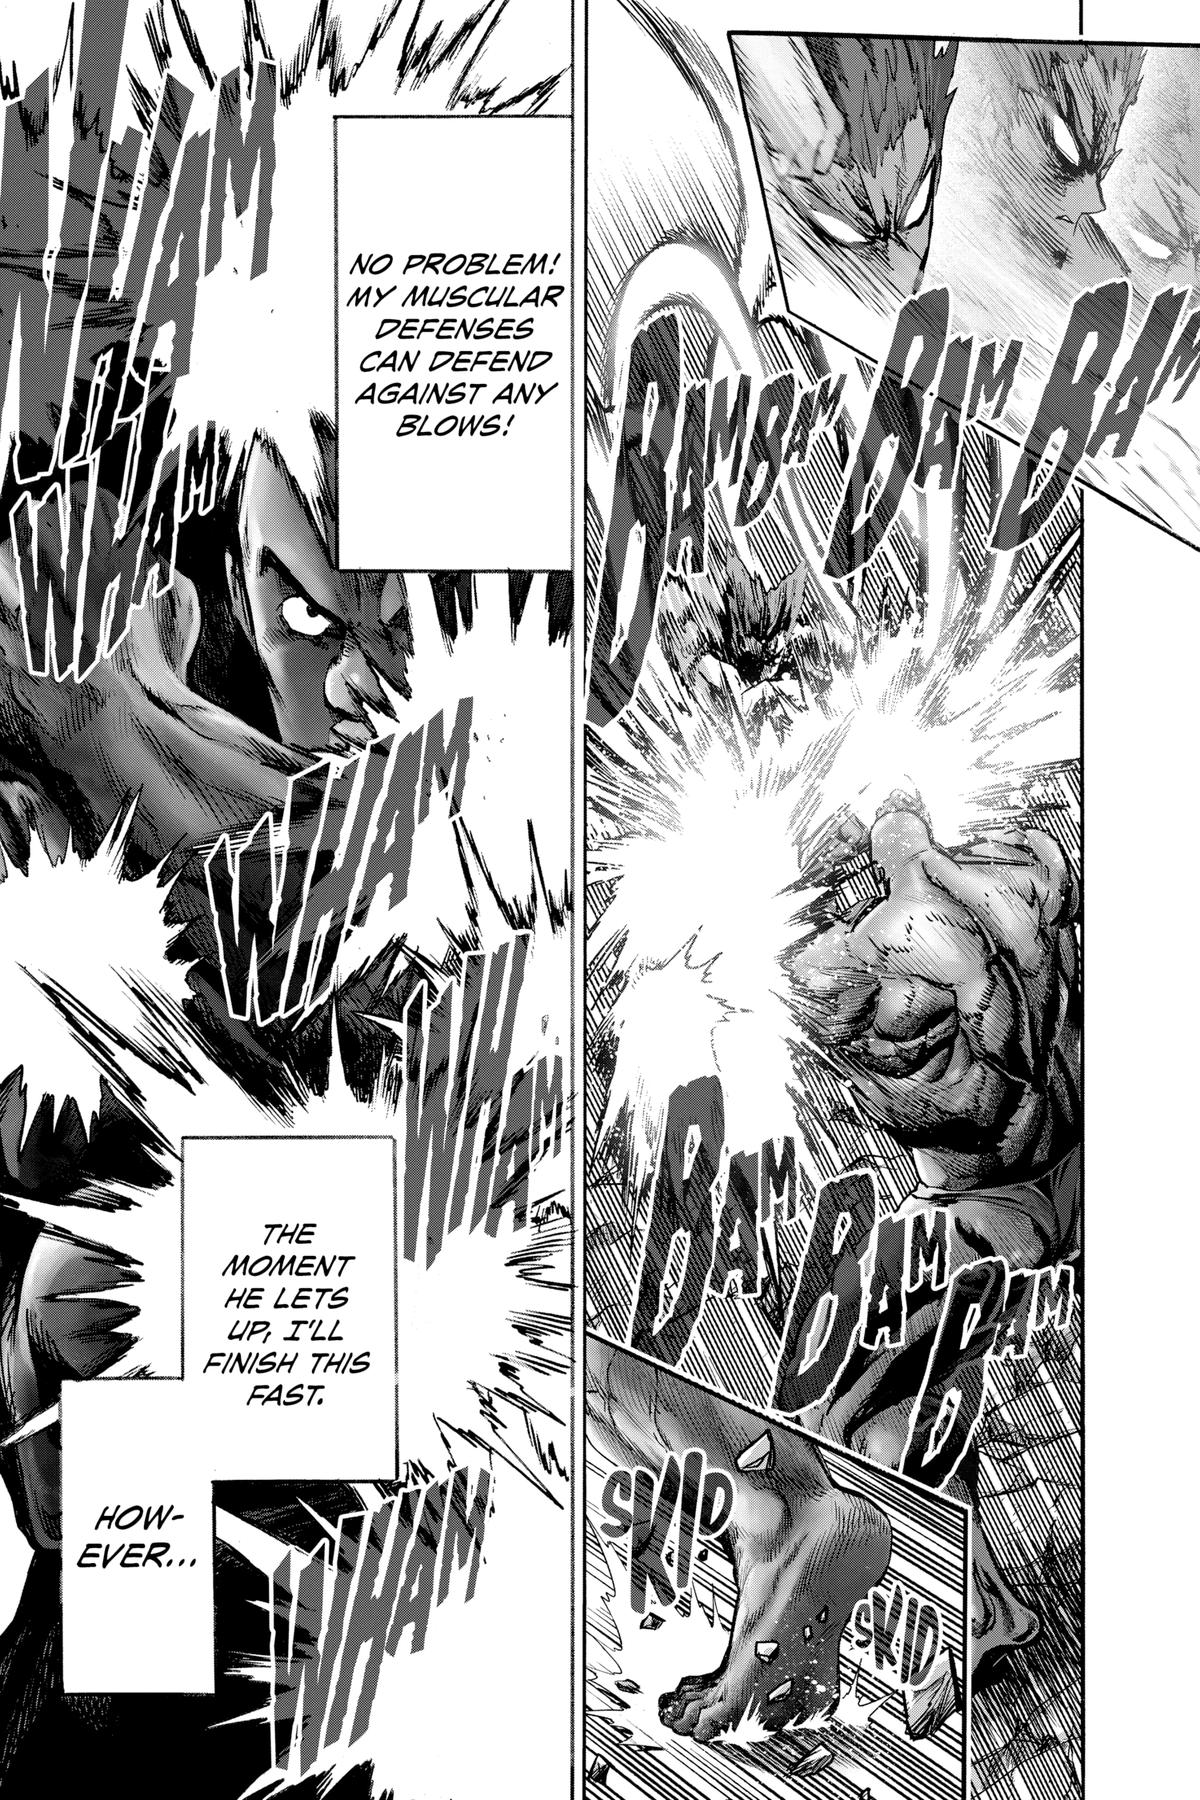 One-Punch Man, Punch 130 image 27